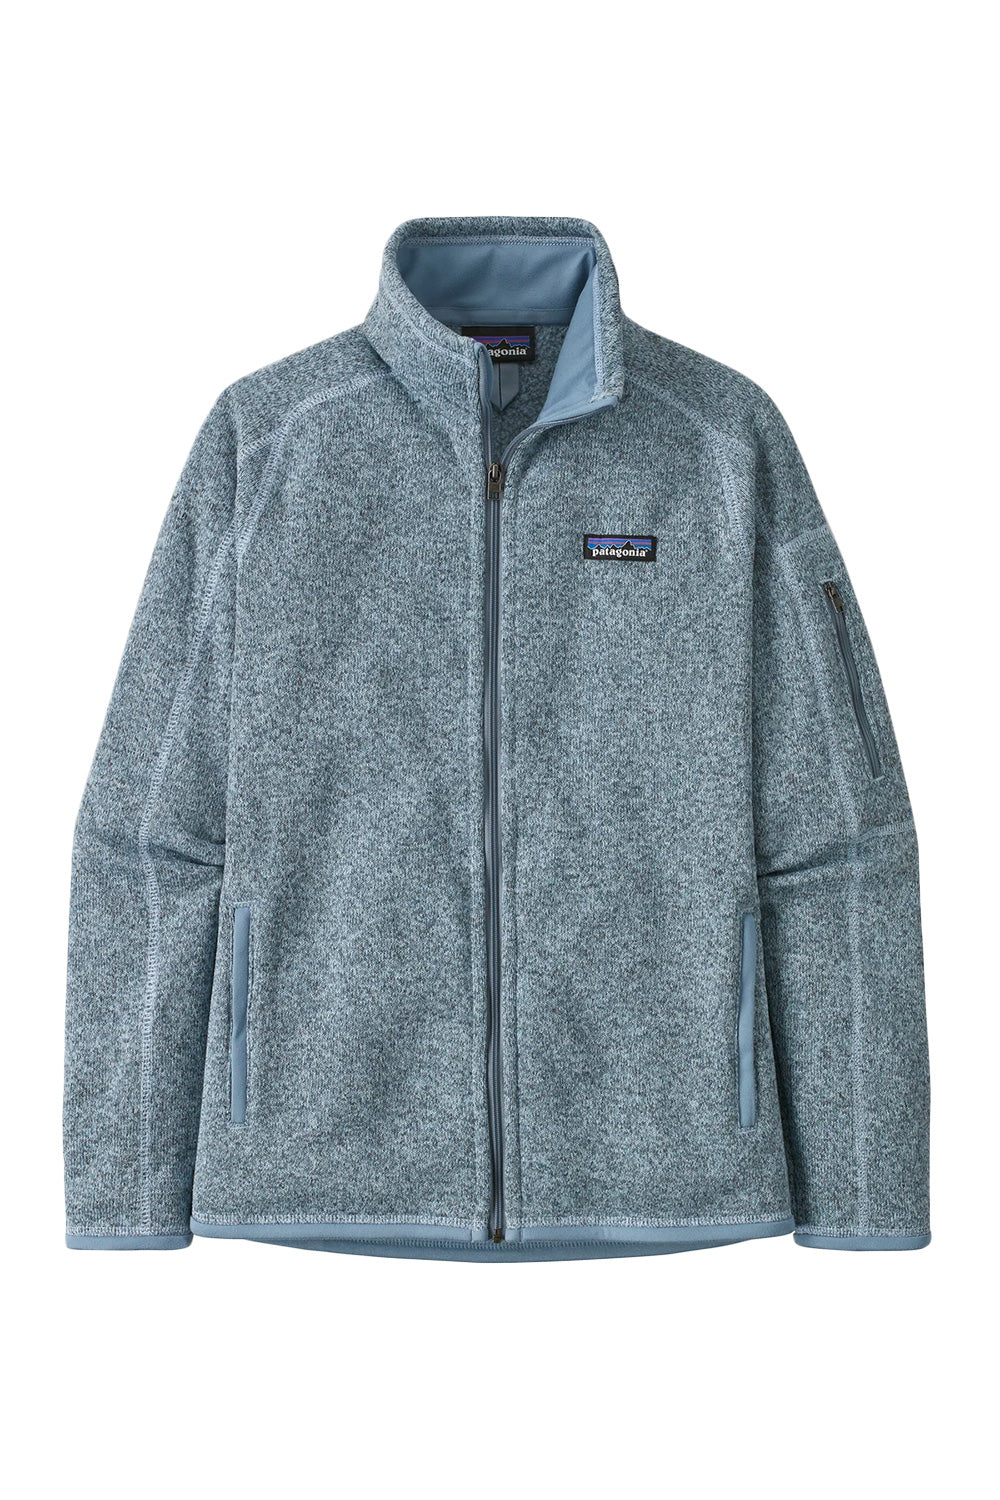 Patagonia Better Sweater Jacket - Steam Blue | Moment Surf Co. – Moment Surf Company